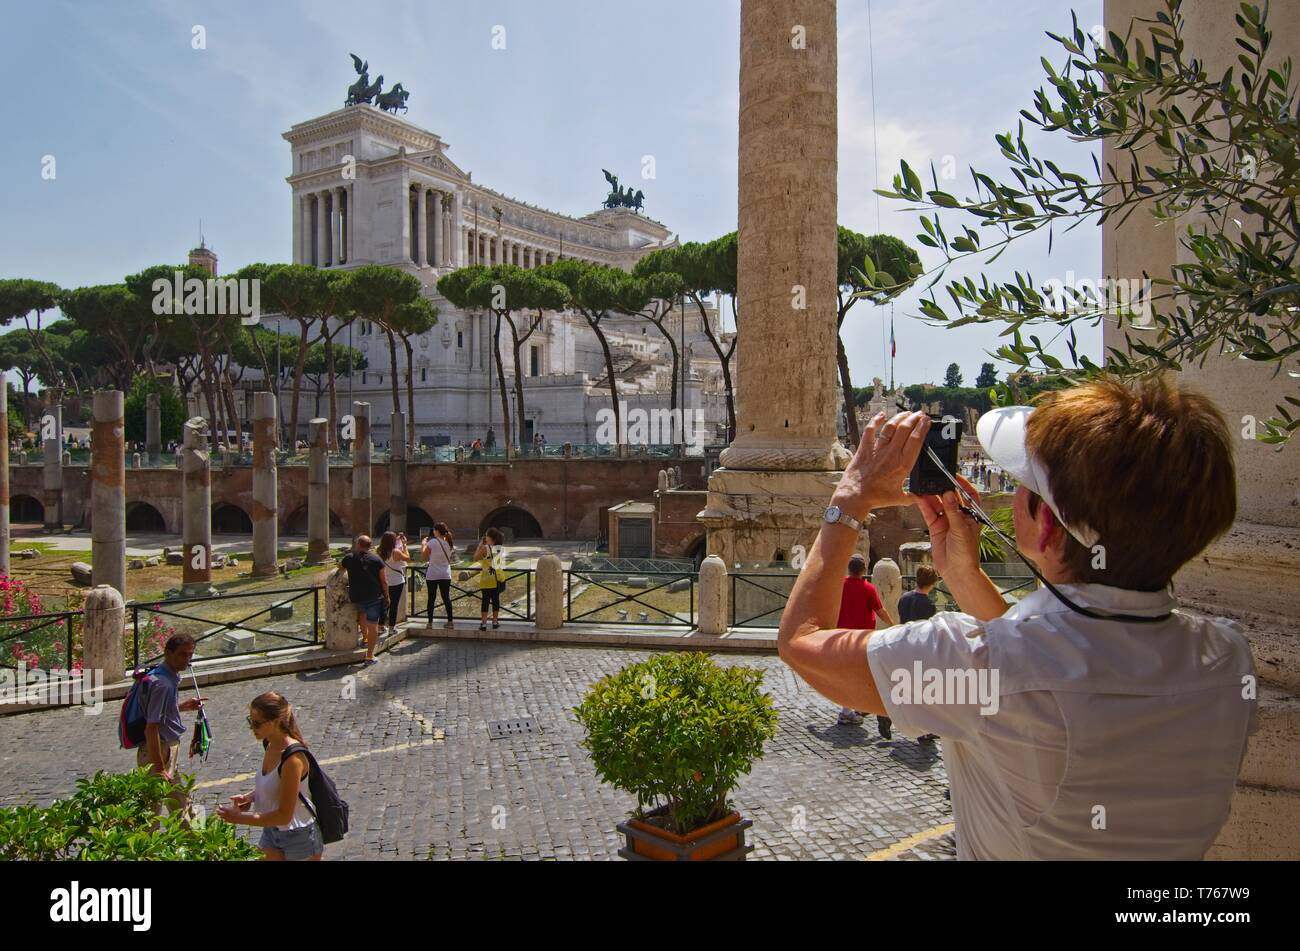 Looking across the Trajan Forum to the Vittorio Emanuele II Monument (Altare della Patria or Altar of the Fatherland) in Rome on a bright, sunny day Stock Photo